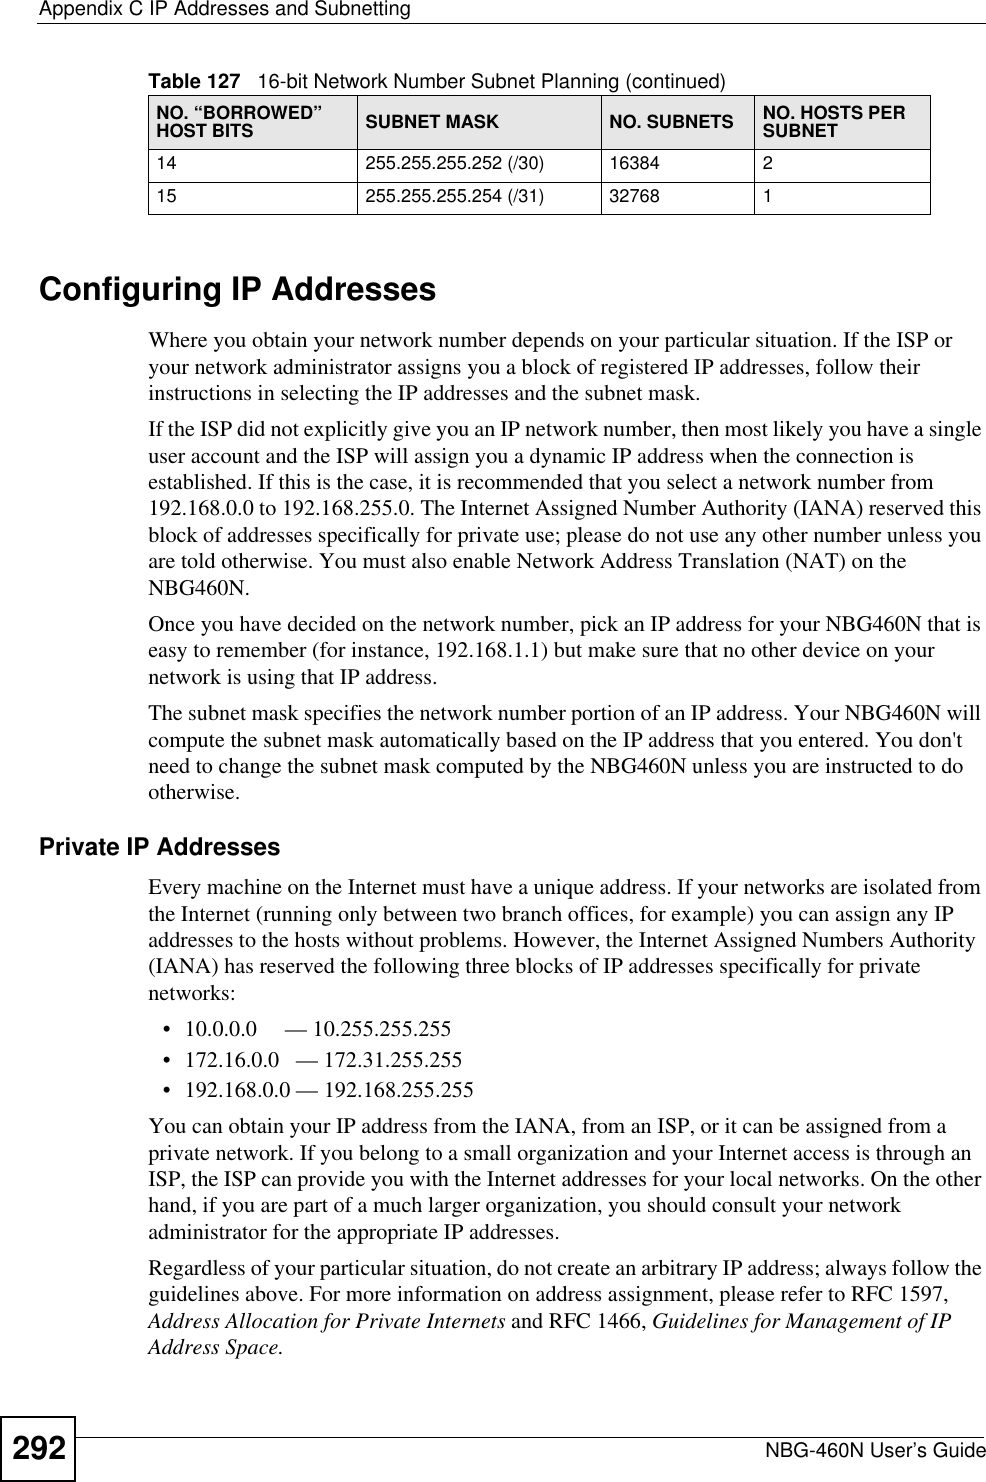 Appendix C IP Addresses and SubnettingNBG-460N User’s Guide292Configuring IP AddressesWhere you obtain your network number depends on your particular situation. If the ISP or your network administrator assigns you a block of registered IP addresses, follow their instructions in selecting the IP addresses and the subnet mask.If the ISP did not explicitly give you an IP network number, then most likely you have a single user account and the ISP will assign you a dynamic IP address when the connection is established. If this is the case, it is recommended that you select a network number from 192.168.0.0 to 192.168.255.0. The Internet Assigned Number Authority (IANA) reserved this block of addresses specifically for private use; please do not use any other number unless you are told otherwise. You must also enable Network Address Translation (NAT) on the NBG460N.Once you have decided on the network number, pick an IP address for your NBG460N that is easy to remember (for instance, 192.168.1.1) but make sure that no other device on your network is using that IP address.The subnet mask specifies the network number portion of an IP address. Your NBG460N will compute the subnet mask automatically based on the IP address that you entered. You don&apos;t need to change the subnet mask computed by the NBG460N unless you are instructed to do otherwise.Private IP AddressesEvery machine on the Internet must have a unique address. If your networks are isolated from the Internet (running only between two branch offices, for example) you can assign any IP addresses to the hosts without problems. However, the Internet Assigned Numbers Authority (IANA) has reserved the following three blocks of IP addresses specifically for private networks:• 10.0.0.0     — 10.255.255.255• 172.16.0.0   — 172.31.255.255• 192.168.0.0 — 192.168.255.255You can obtain your IP address from the IANA, from an ISP, or it can be assigned from a private network. If you belong to a small organization and your Internet access is through an ISP, the ISP can provide you with the Internet addresses for your local networks. On the other hand, if you are part of a much larger organization, you should consult your network administrator for the appropriate IP addresses.Regardless of your particular situation, do not create an arbitrary IP address; always follow the guidelines above. For more information on address assignment, please refer to RFC 1597, Address Allocation for Private Internets and RFC 1466, Guidelines for Management of IP Address Space.14 255.255.255.252 (/30) 16384 215 255.255.255.254 (/31) 32768 1Table 127   16-bit Network Number Subnet Planning (continued)NO. “BORROWED” HOST BITS SUBNET MASK NO. SUBNETS NO. HOSTS PER SUBNET